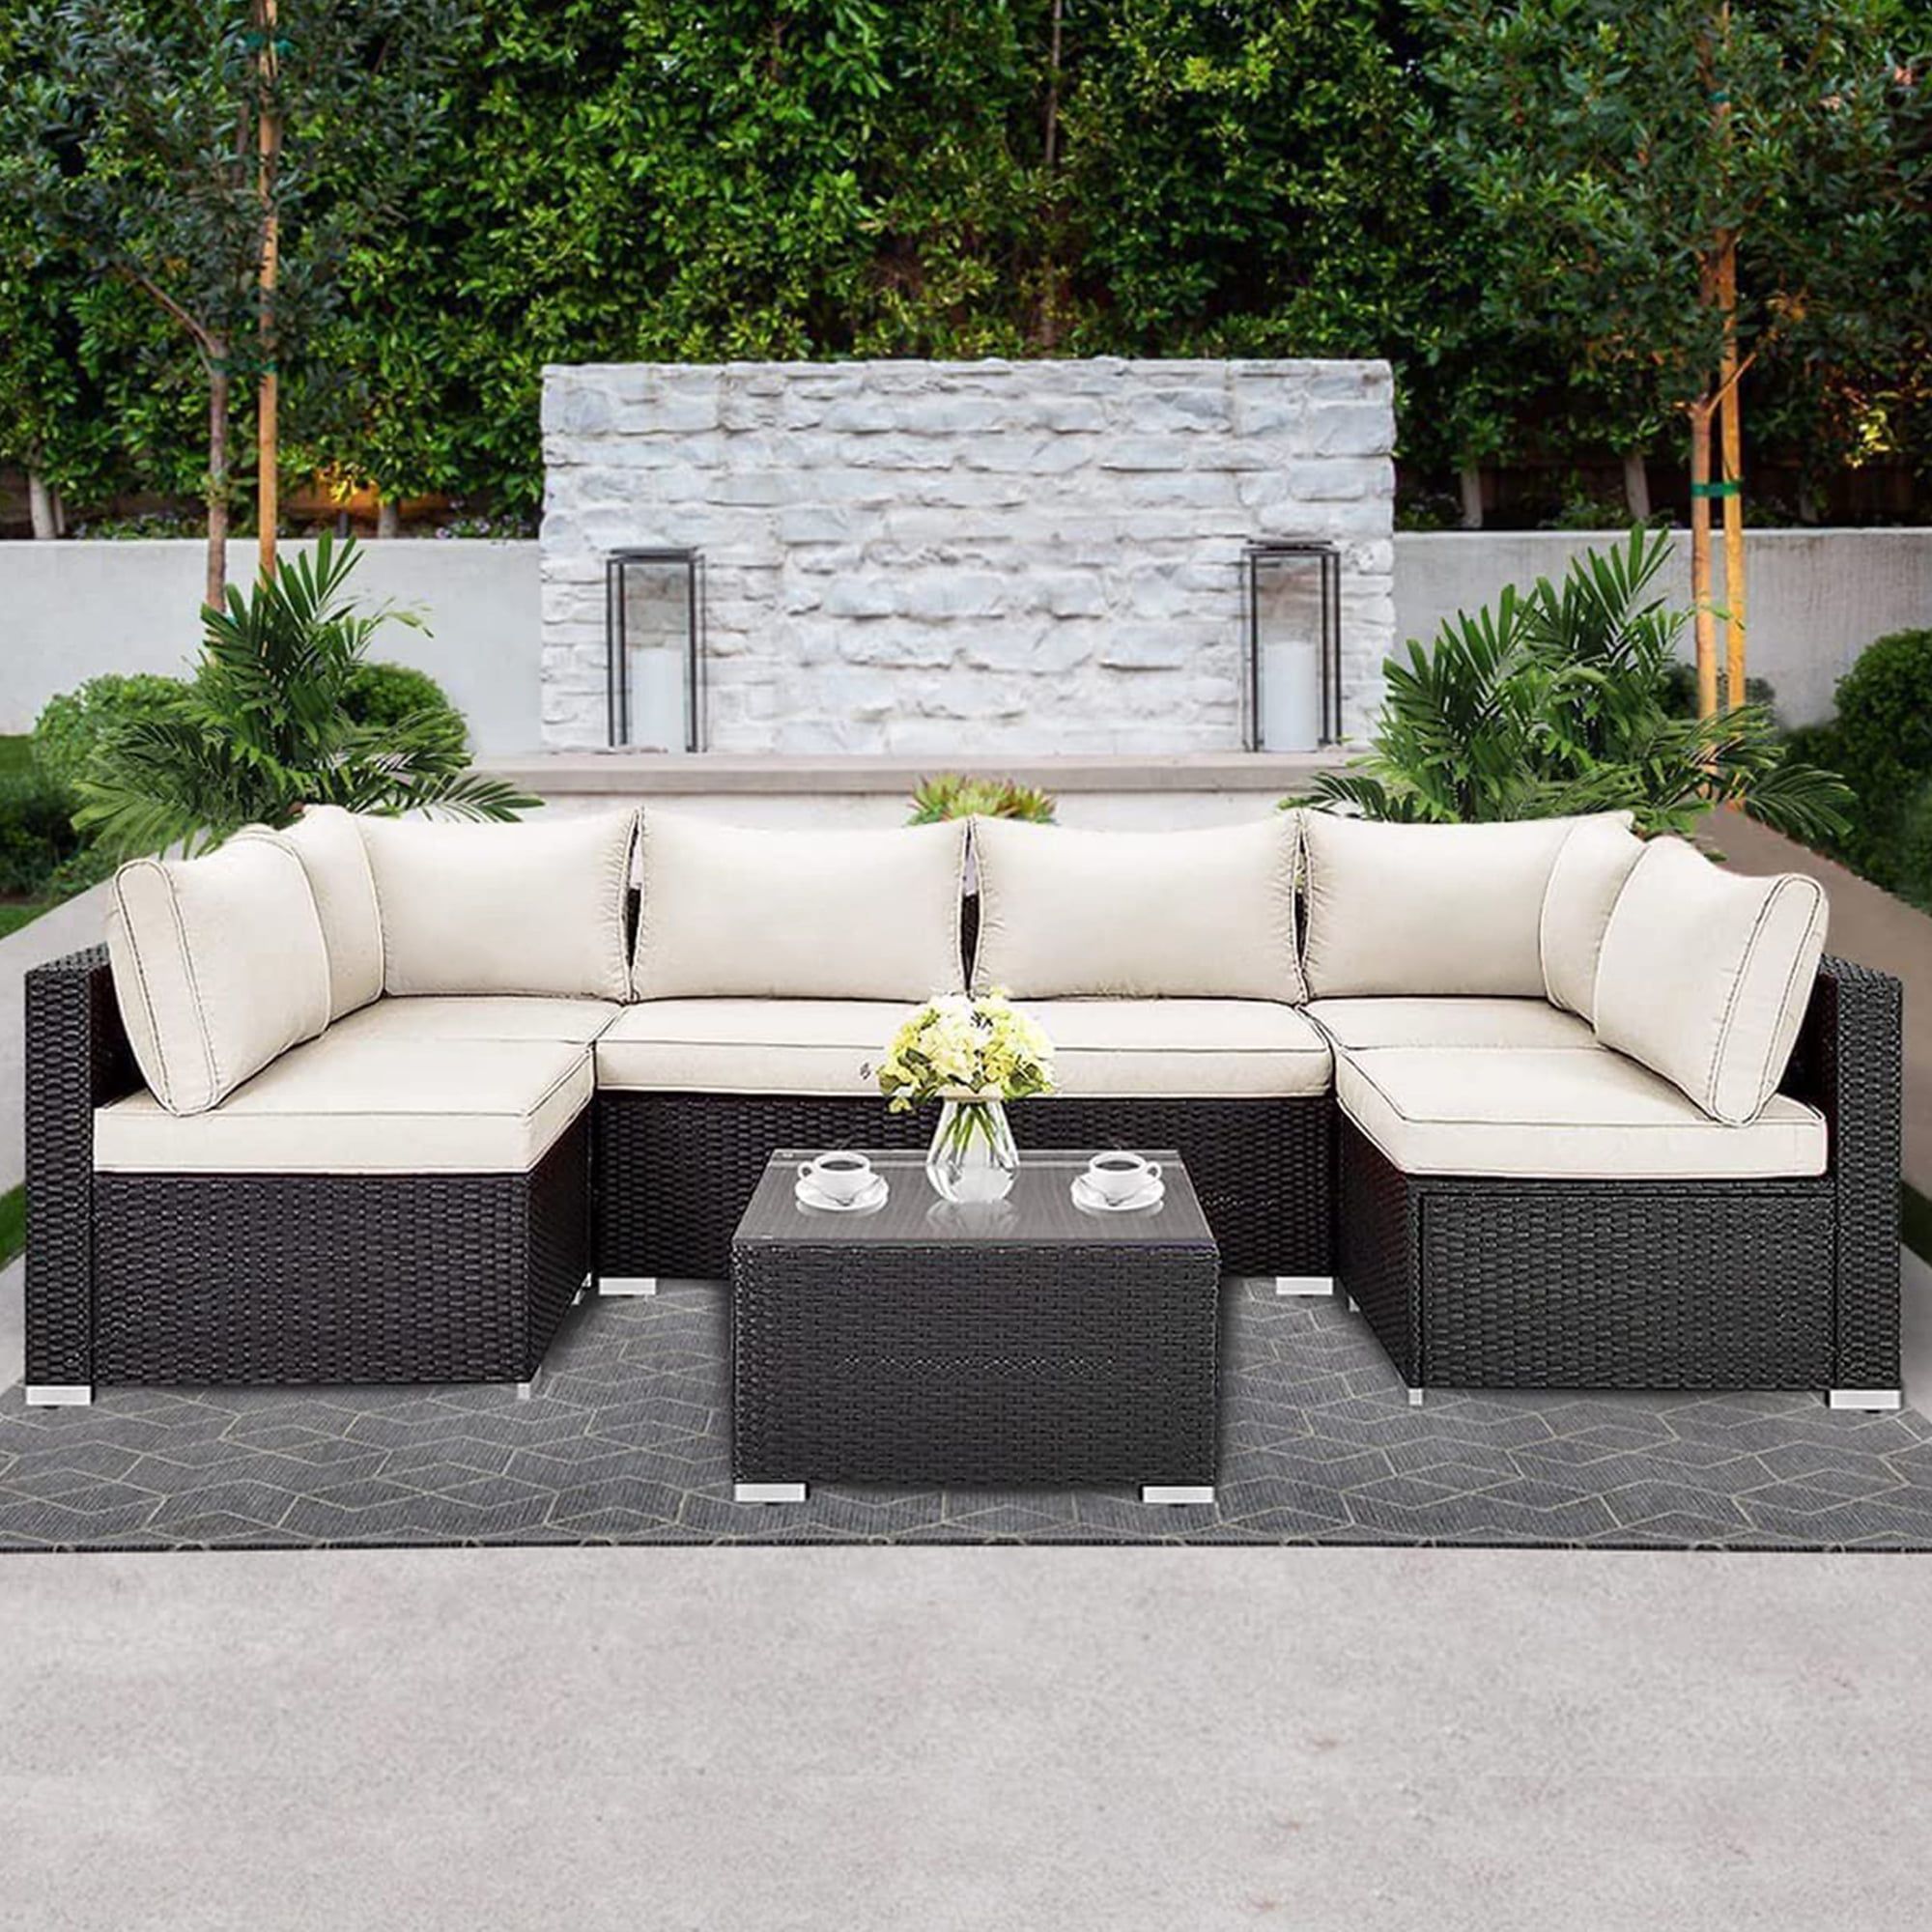 Lausaint Home 7 Pieces Patio Conversation Set, Outdoor Sectional Pe Rattan  Wicker Furniture Seat (beige) – Walmart Regarding Patio Rattan Wicker Furniture (View 11 of 15)